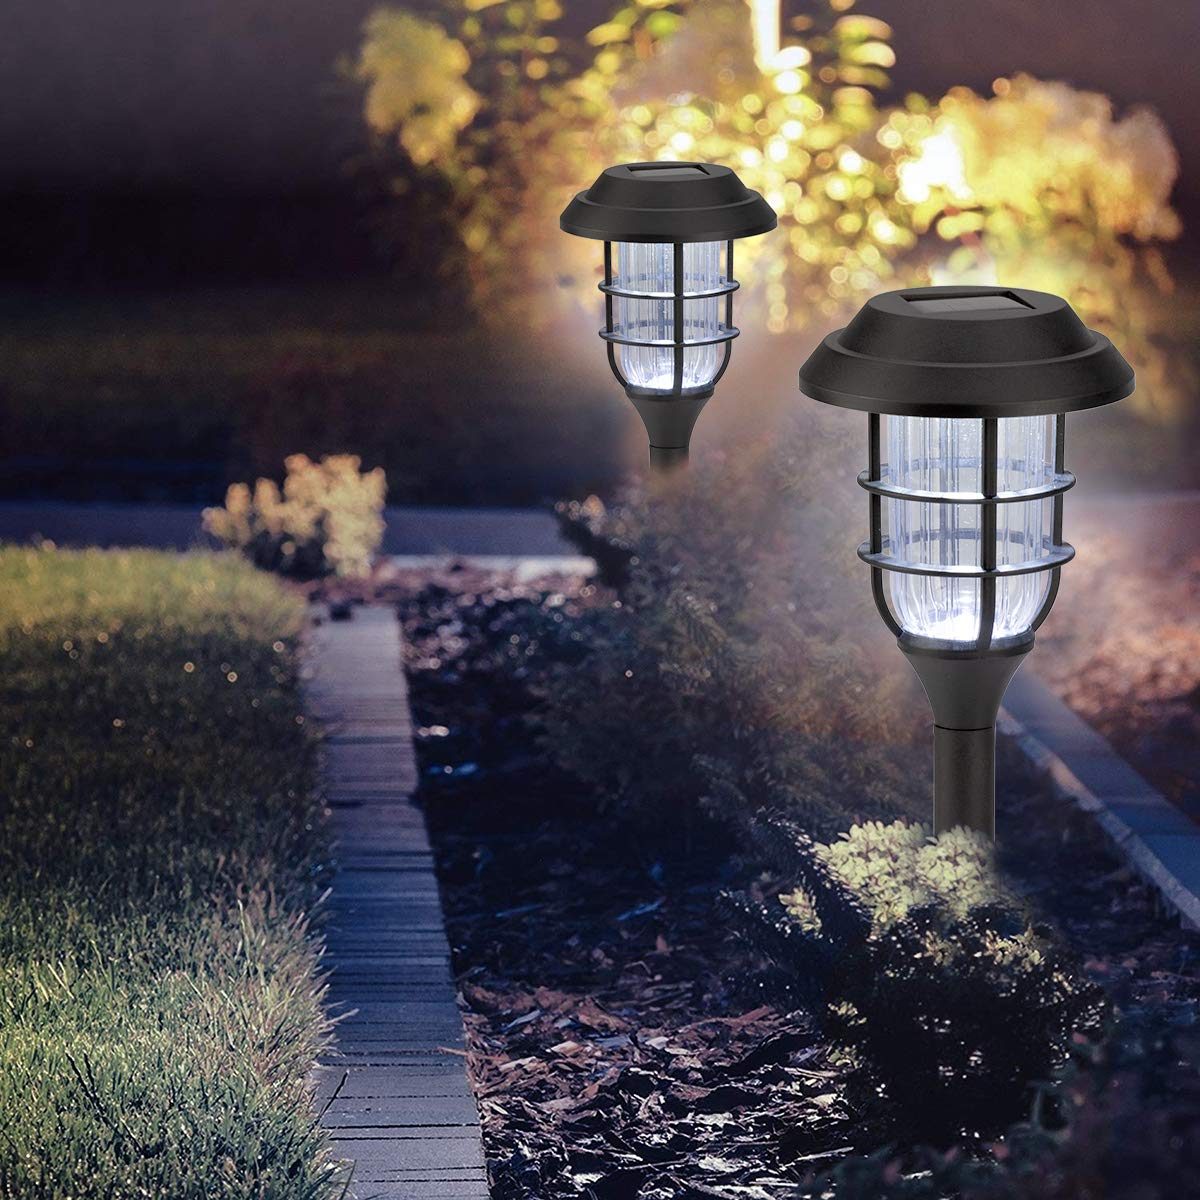 Waterproof Outdoor Garden 7 LED RGB Color Changing Solar Lights